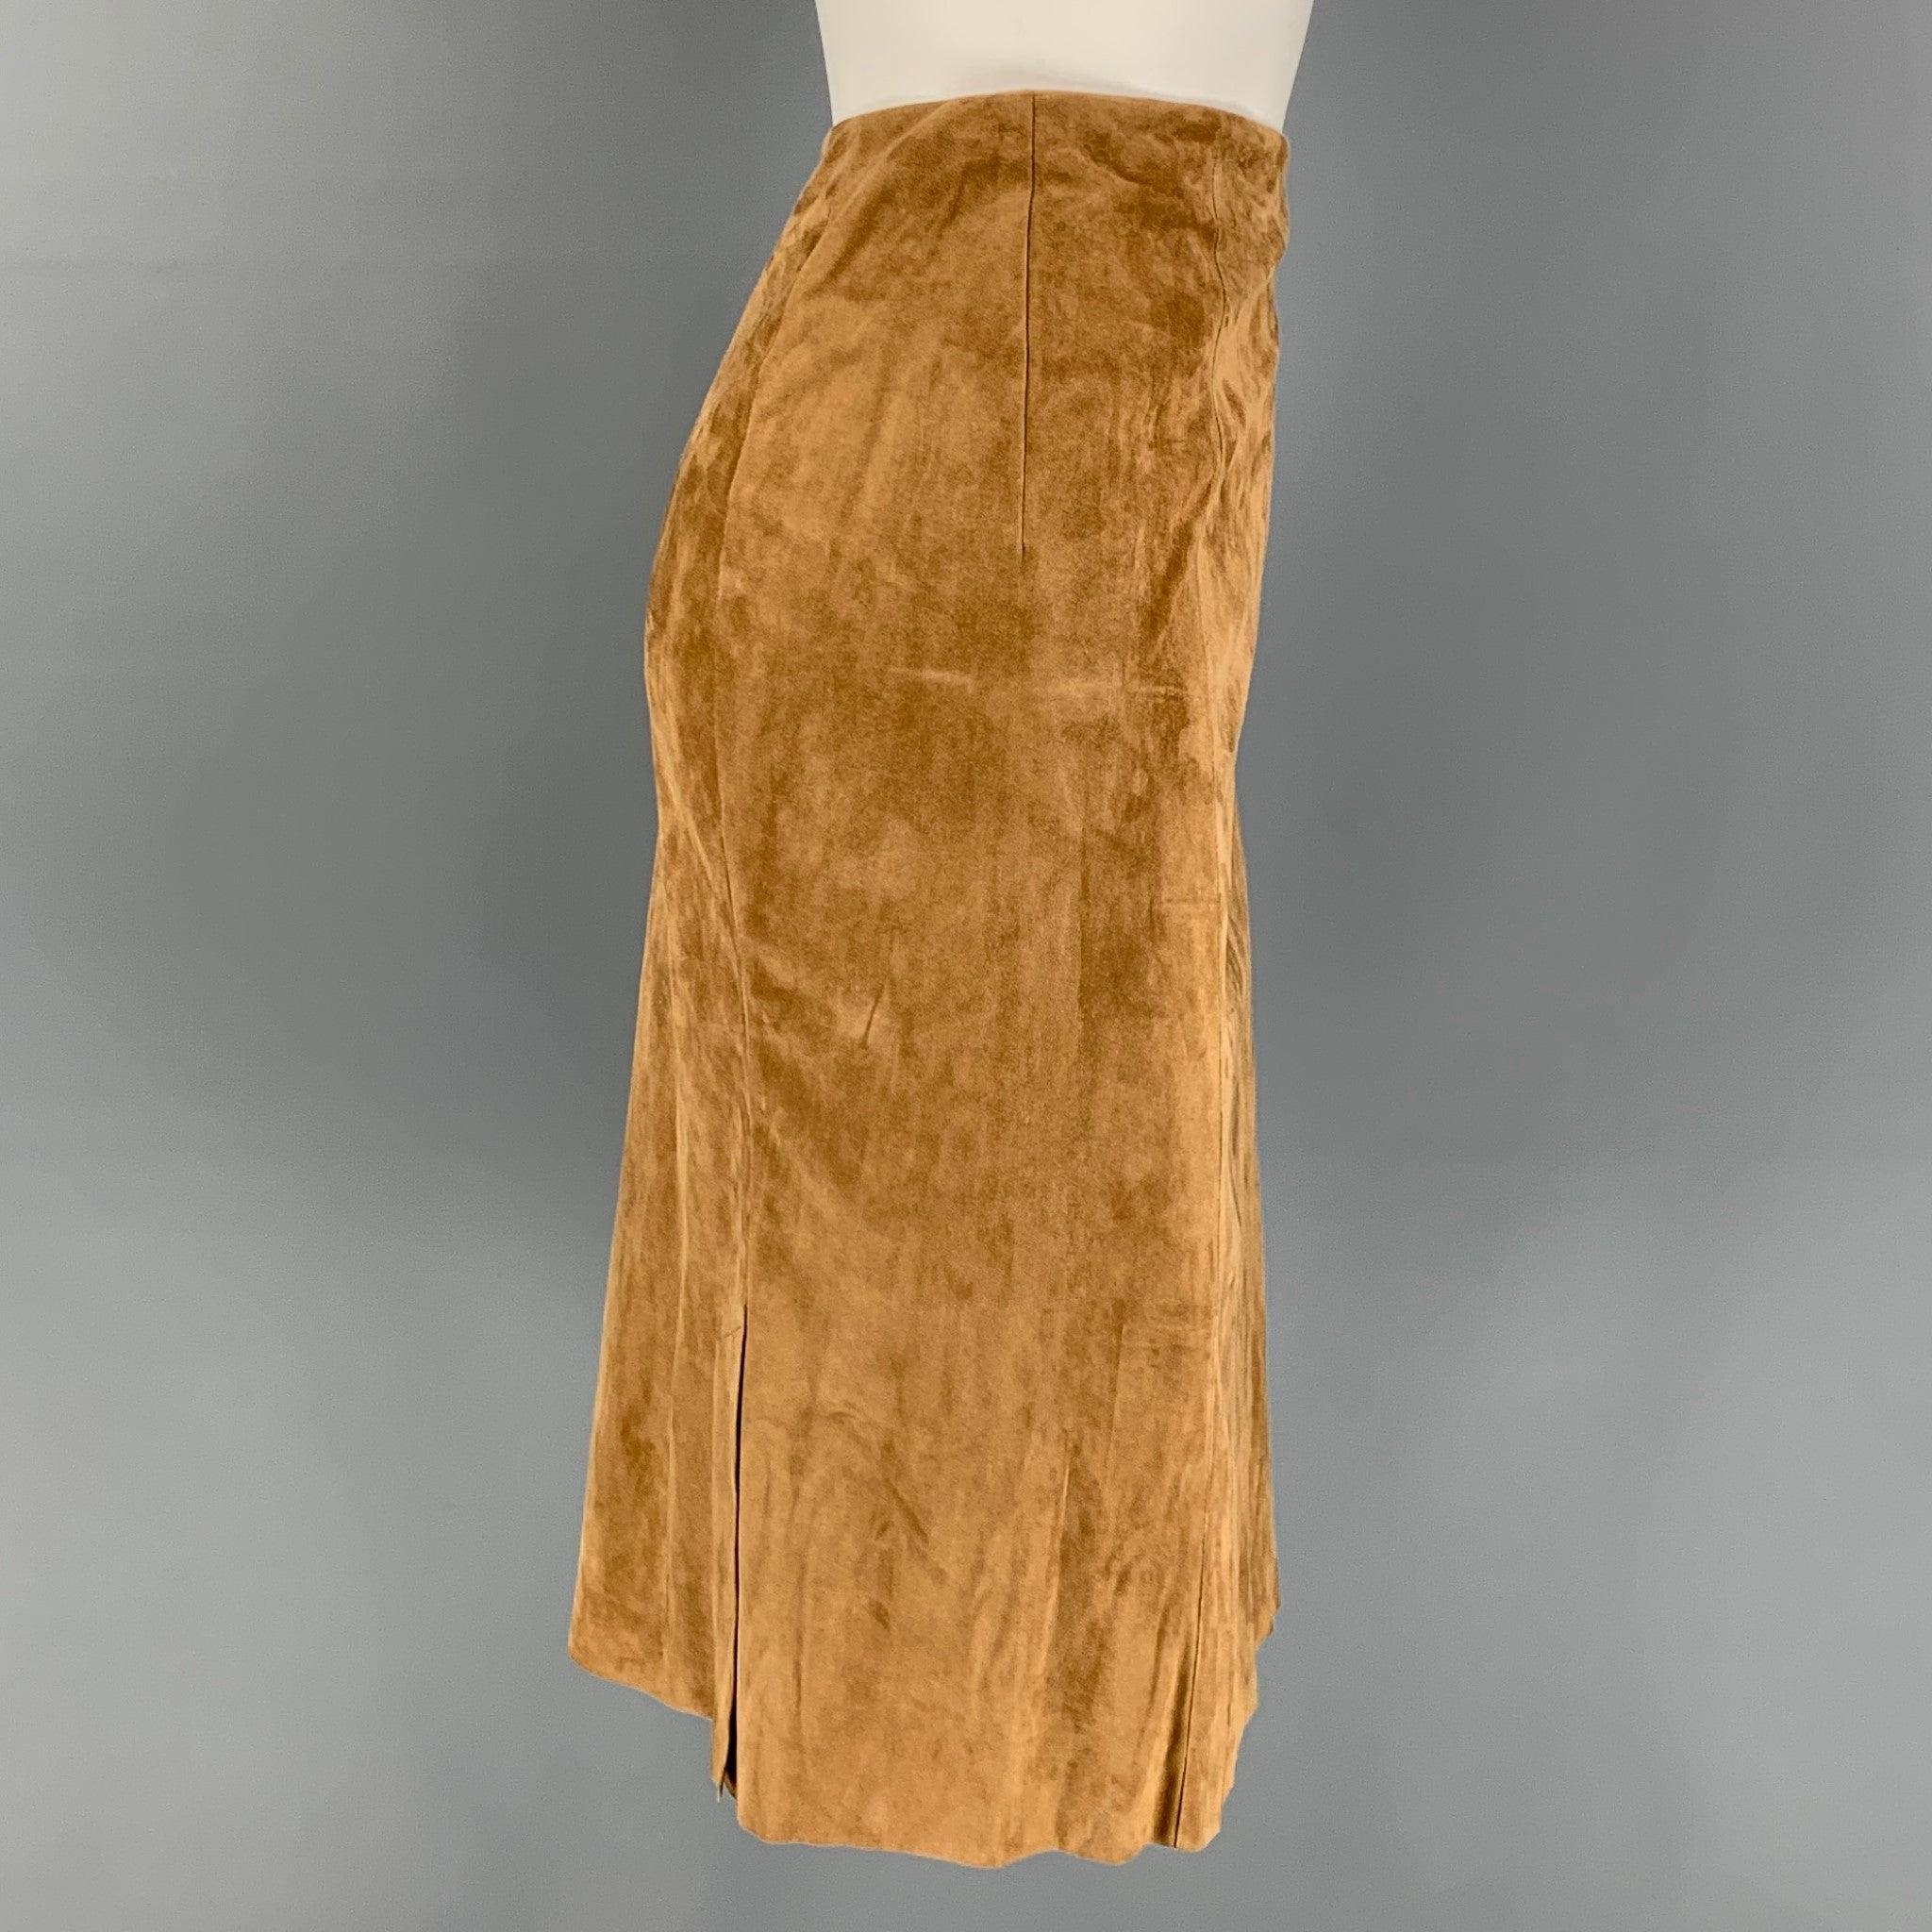 RALPH LAUREN Collection skirt comes in a tan suede featuring a pencil style, double back slits, and a back zip up closure.
Very Good
Pre-Owned Condition. 

Marked:   6 

Measurements: 
  Waist: 29 inches  Hip: 36 inches  Length: 24 inches 
  
  
